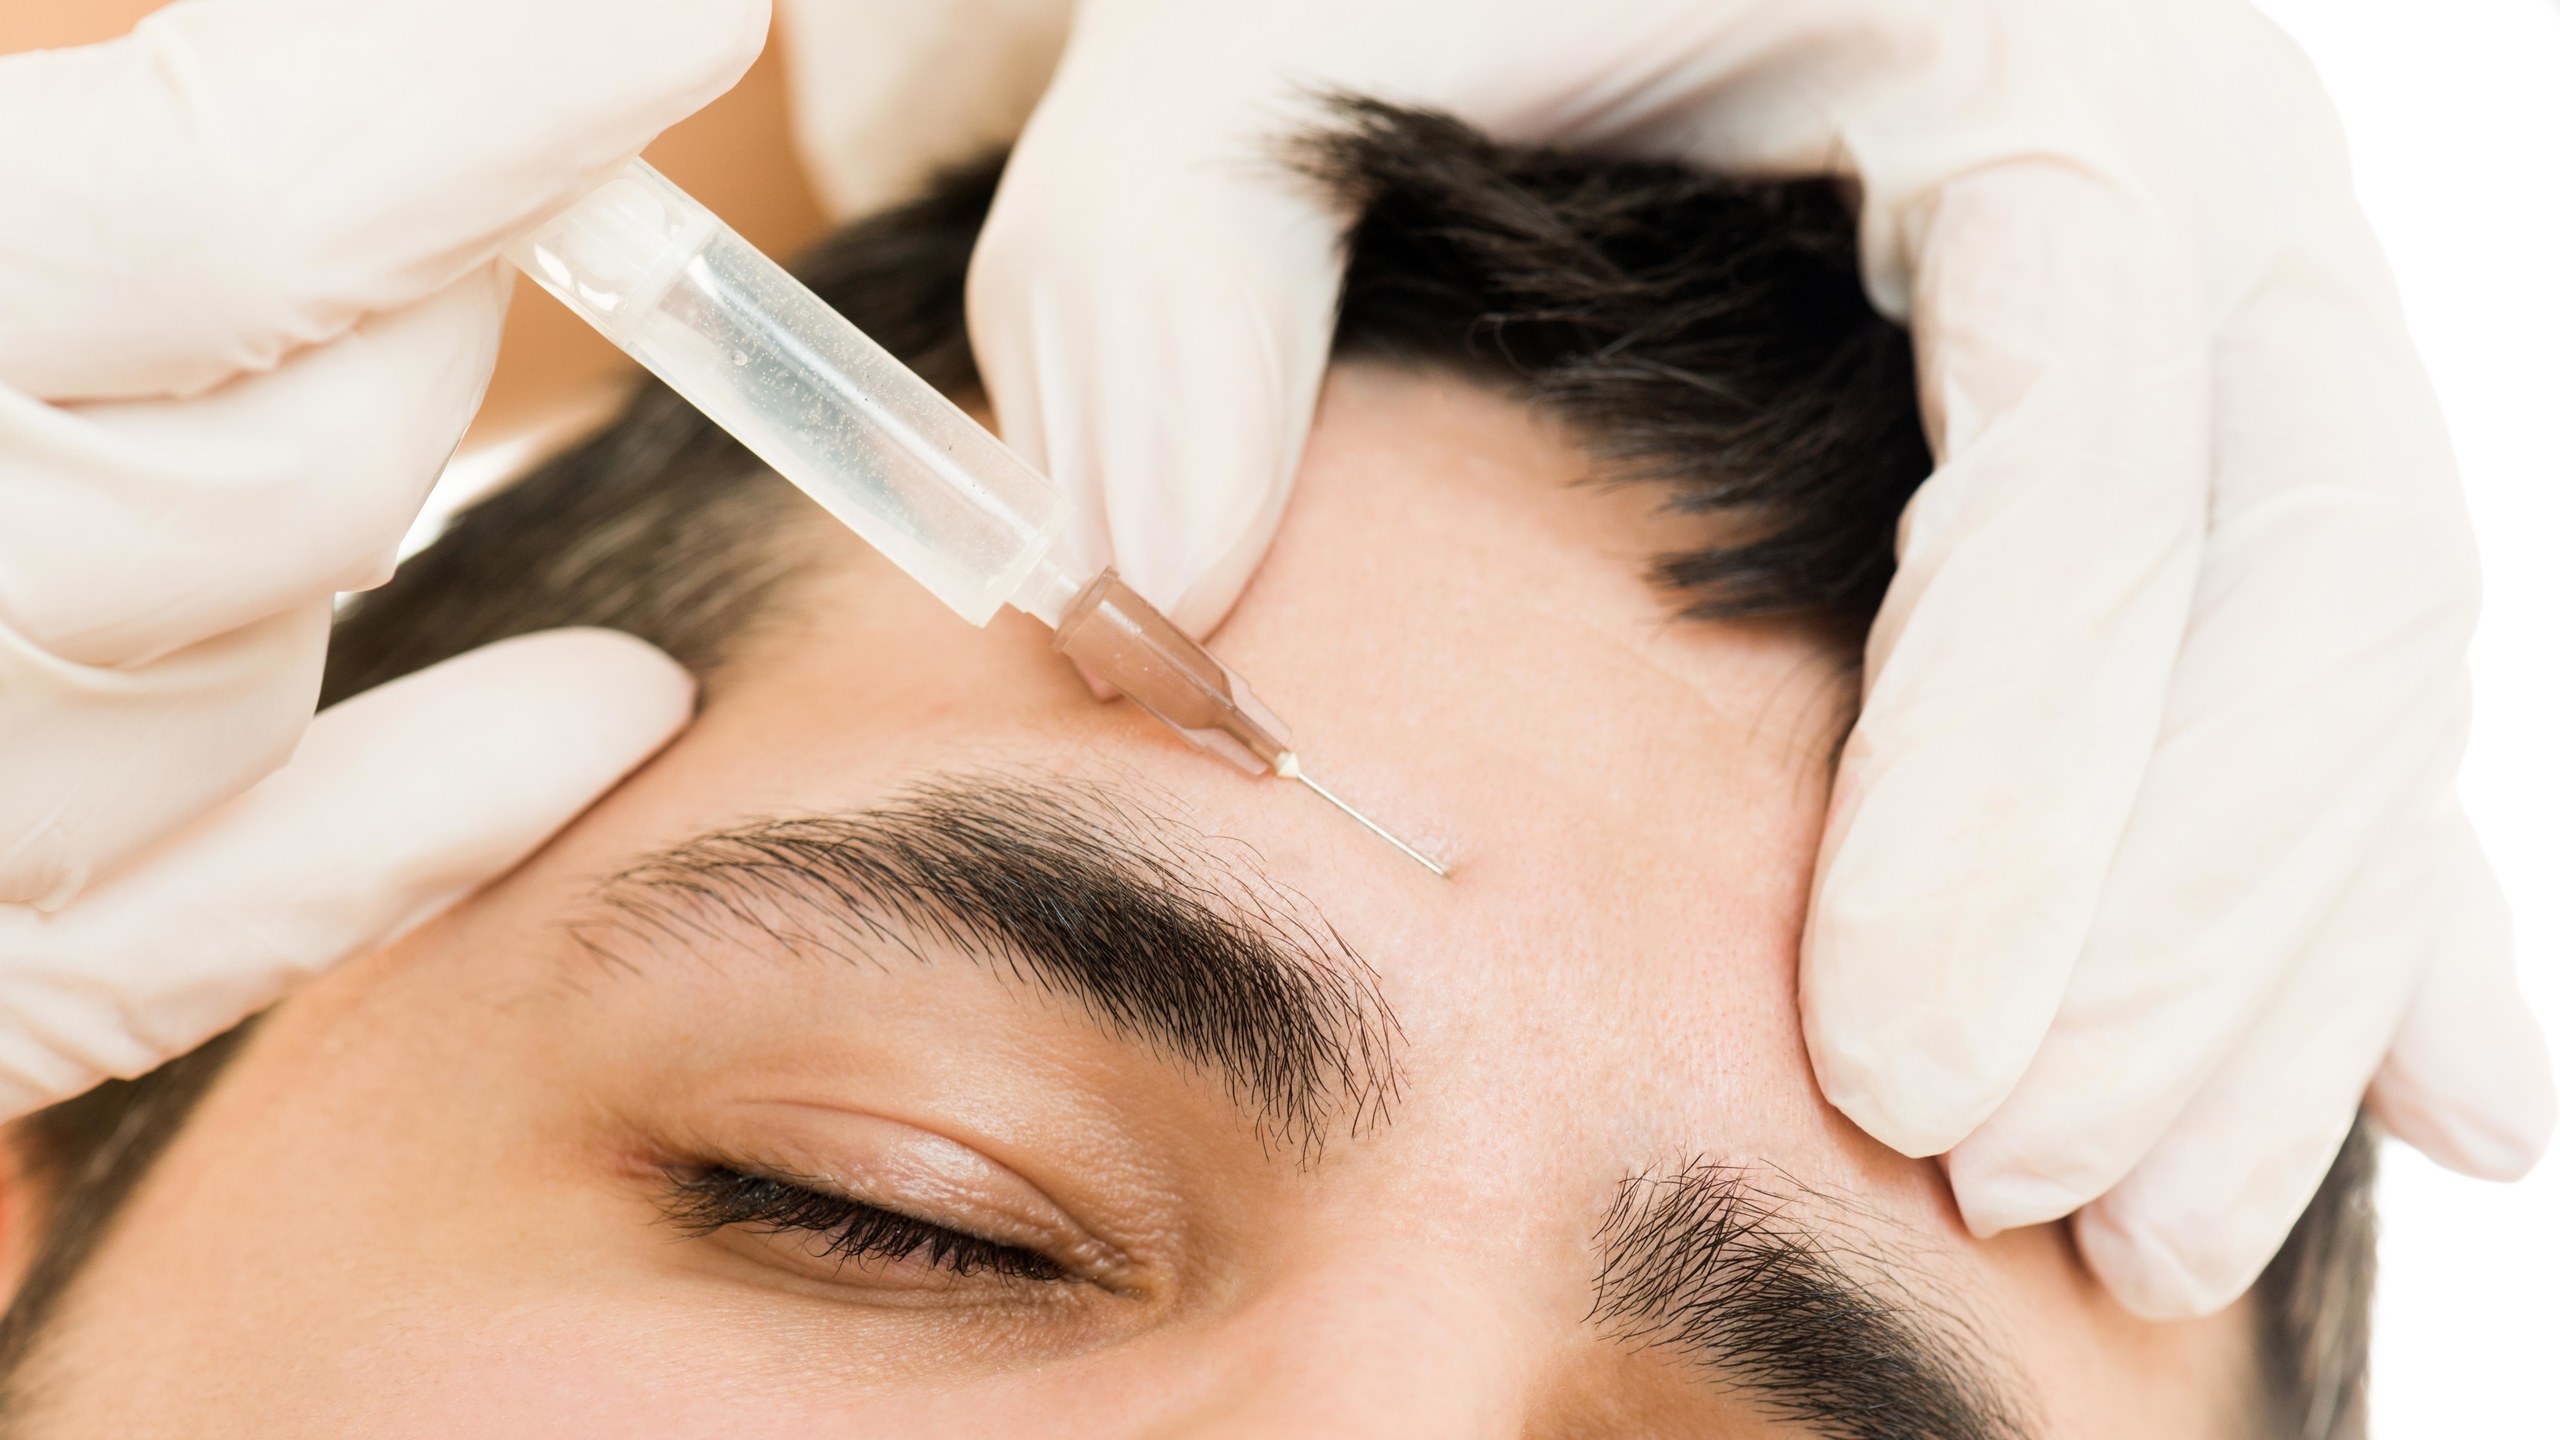 Fda Approves Botox For Use On Forehead Wrinkles Allure